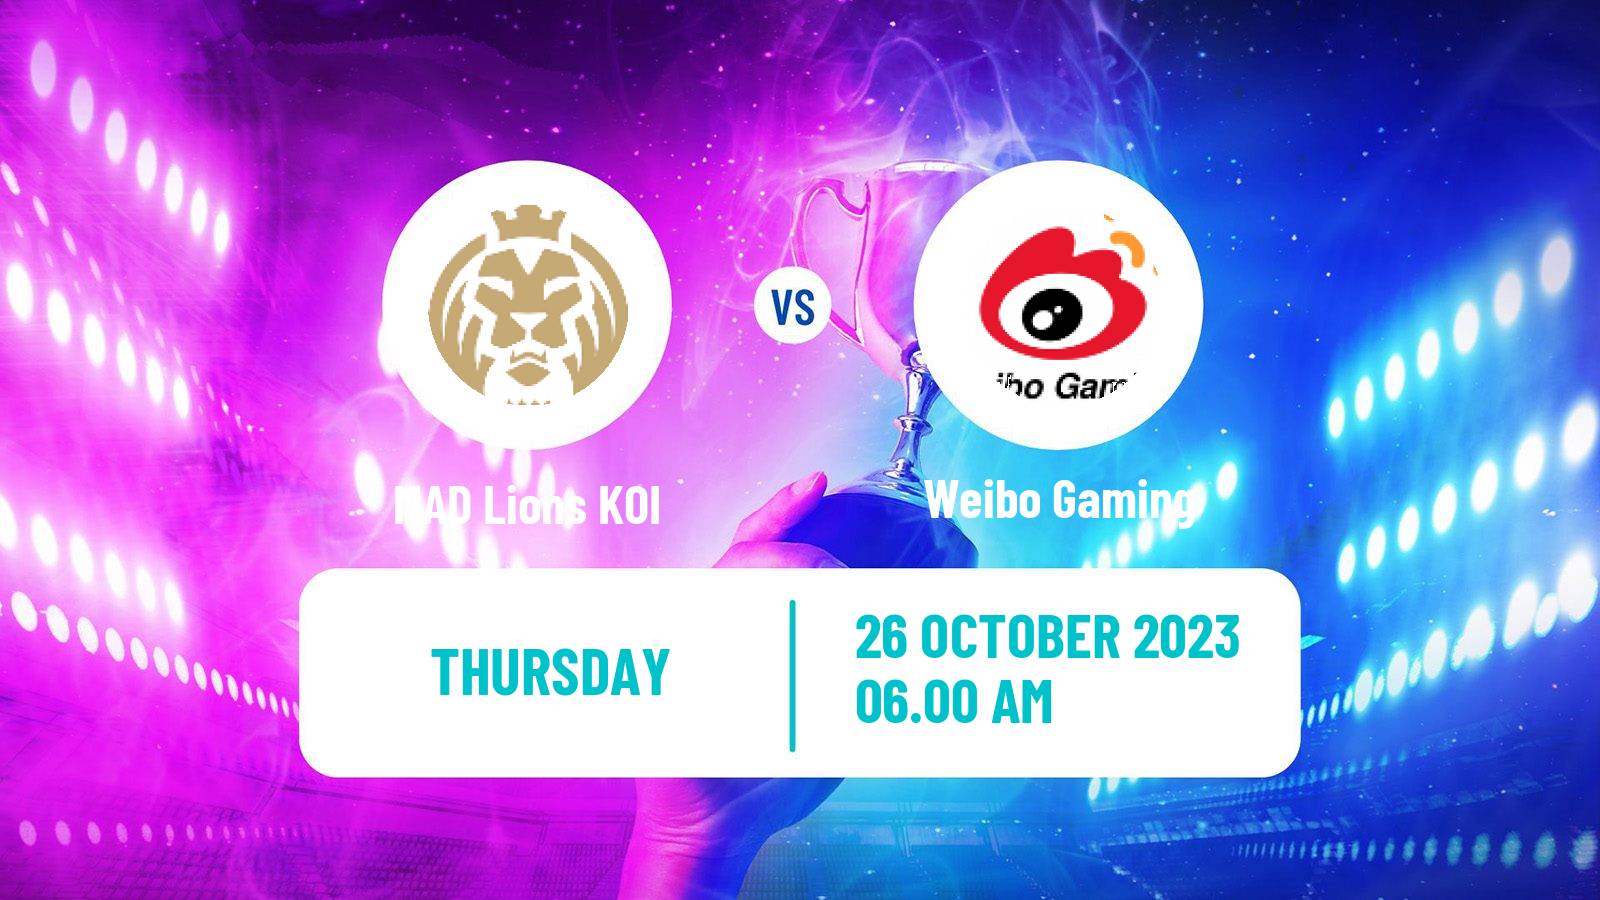 Esports League Of Legends World Championship MAD Lions KOI - Weibo Gaming